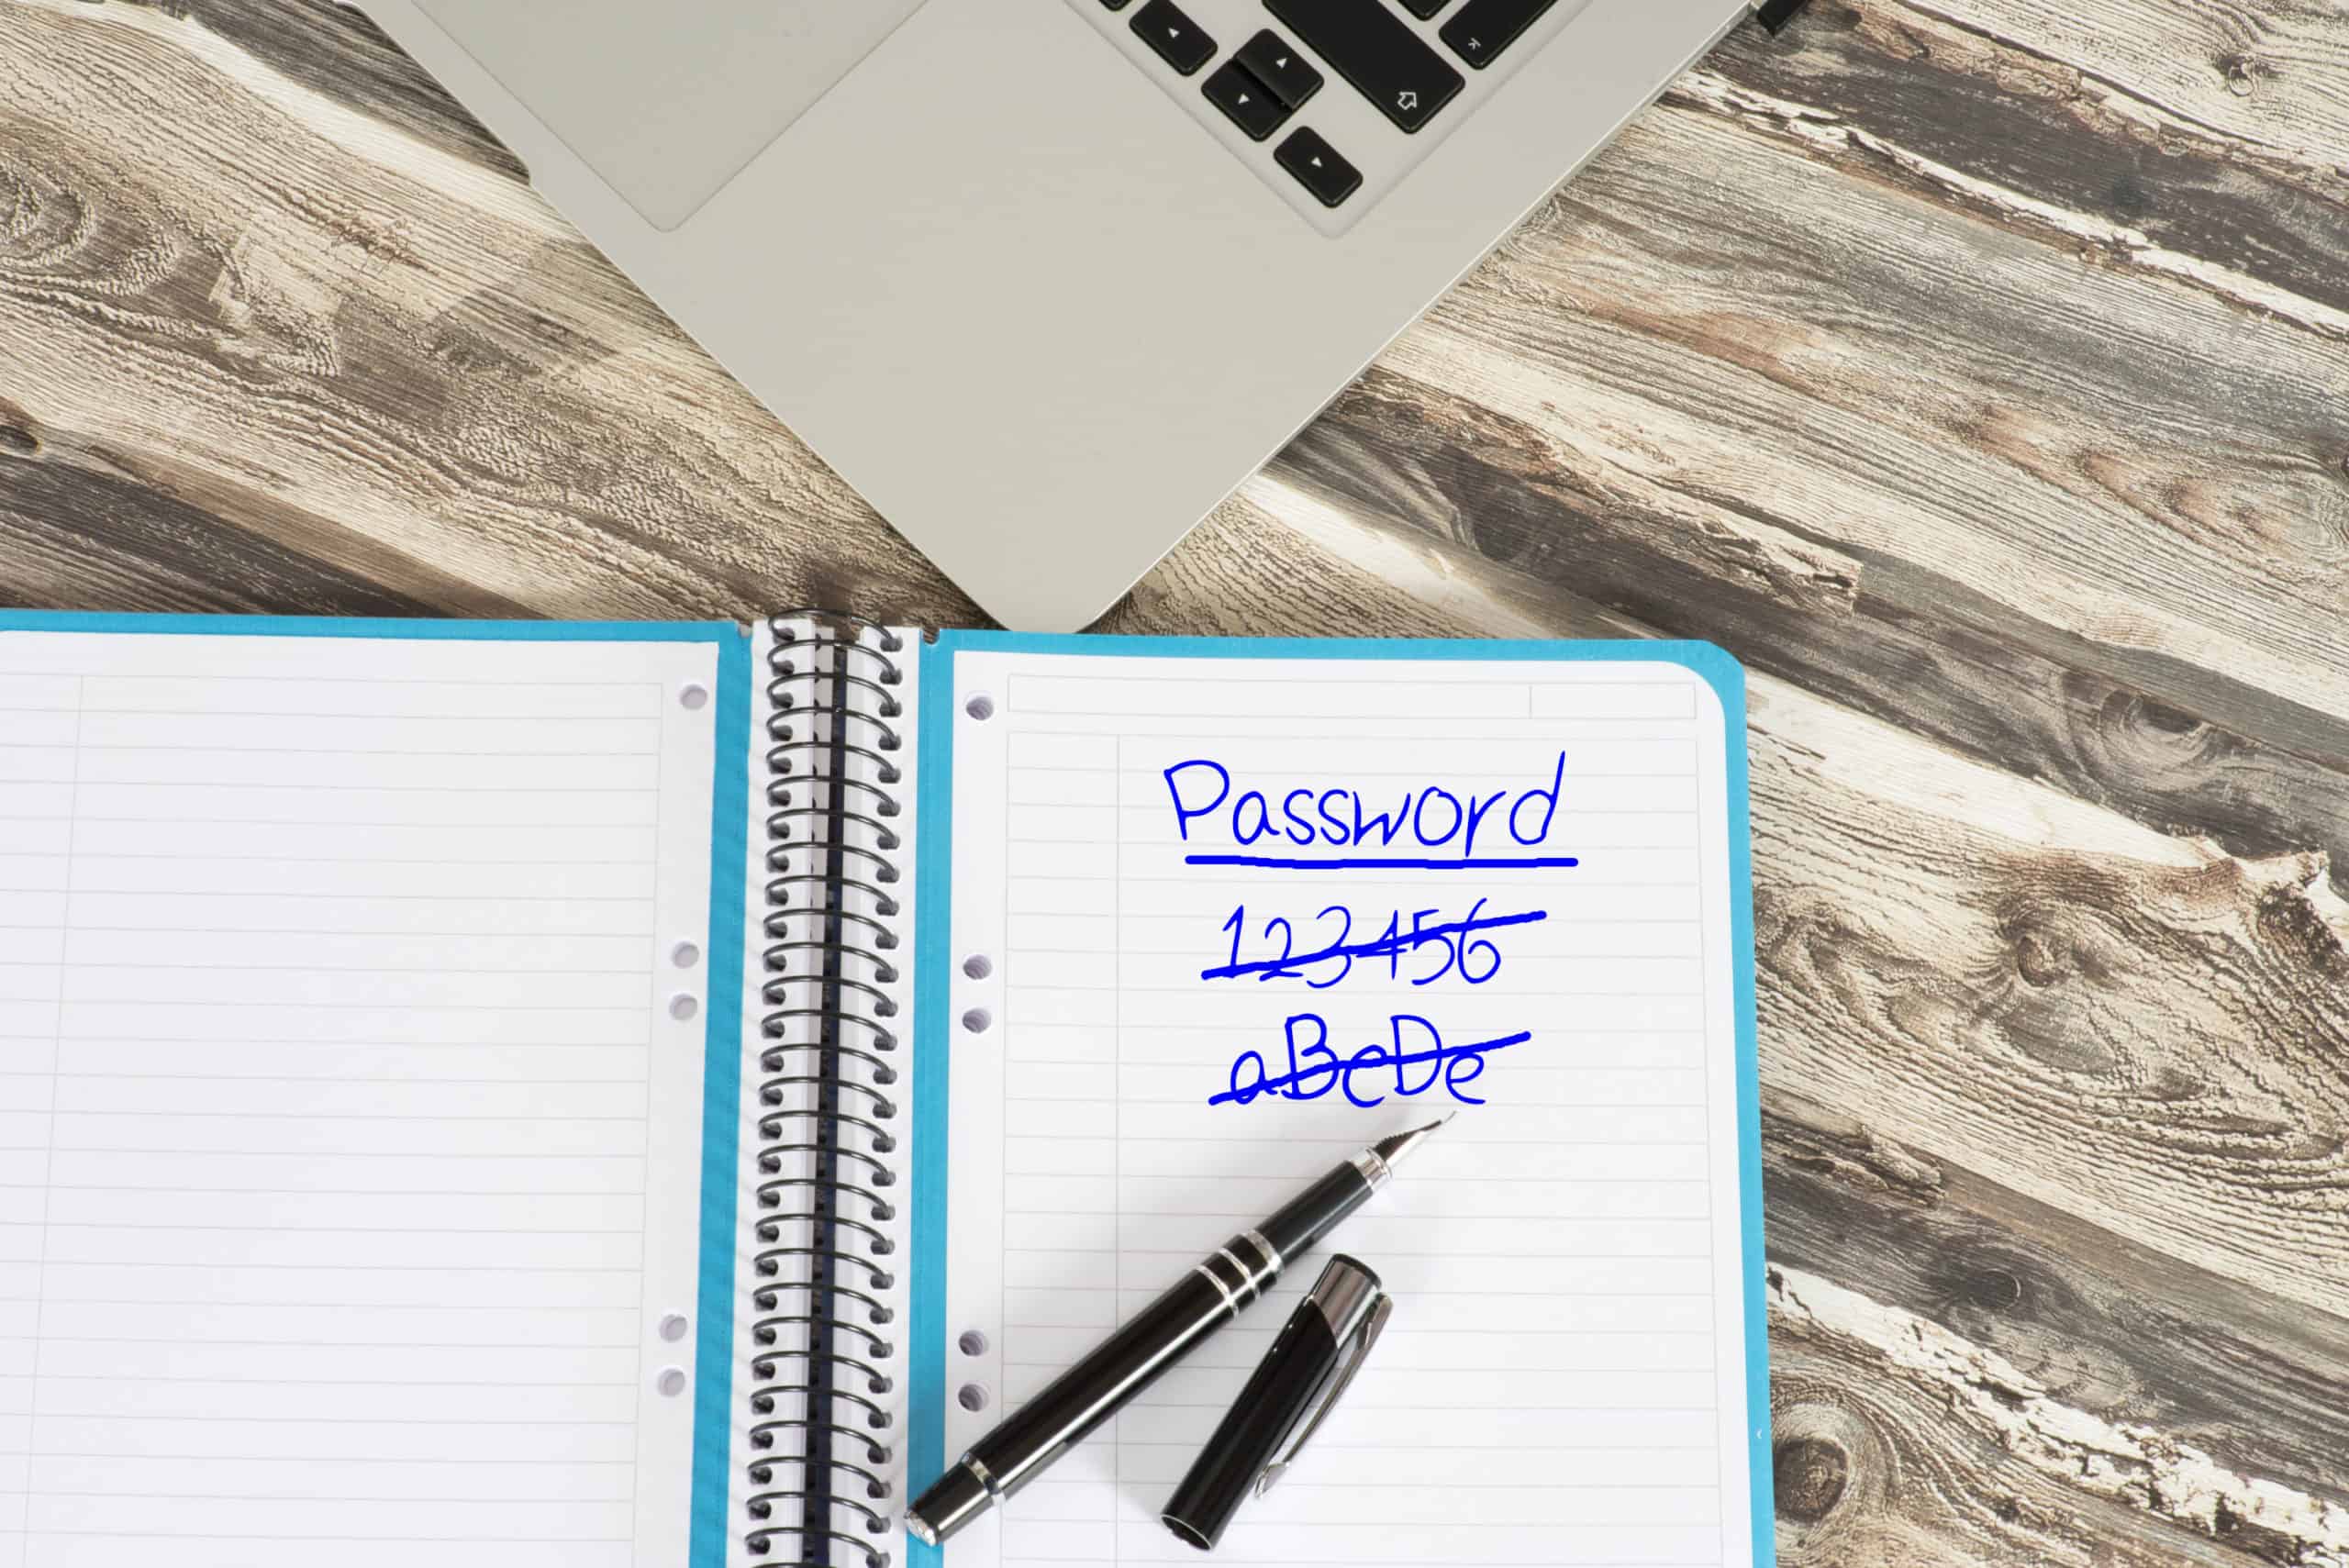 Passwords written and crossed out with a blue ink fountain pen in a notebook--could really use LastPass password manager.